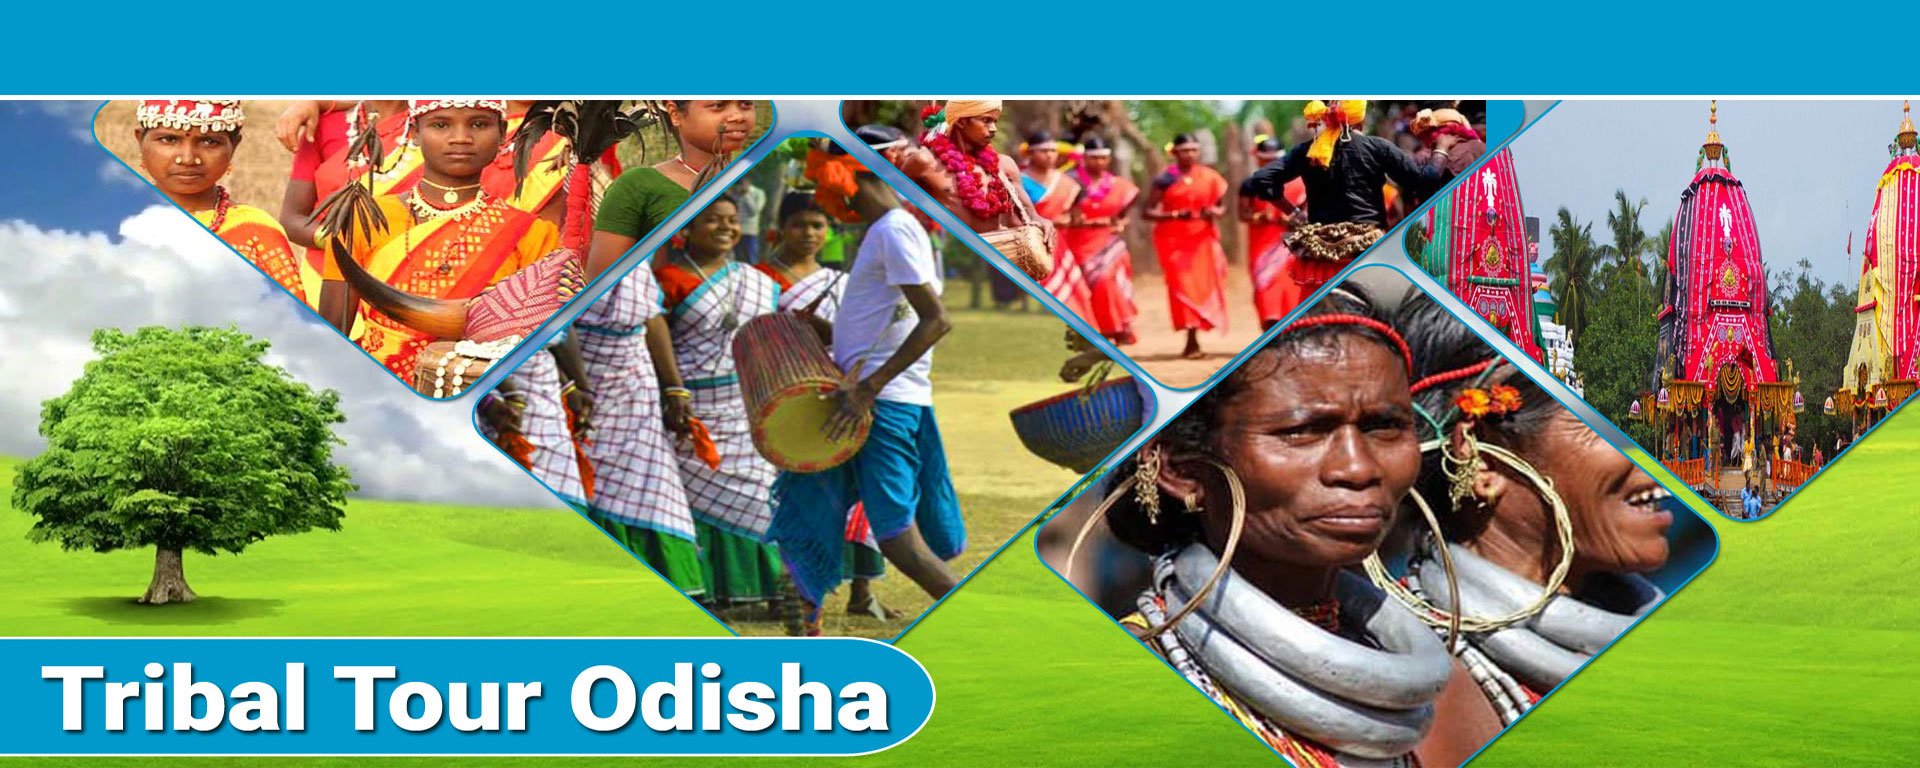 Mishra Tours & Travels Offers Bespoke Odisha Tour and Travels Packages